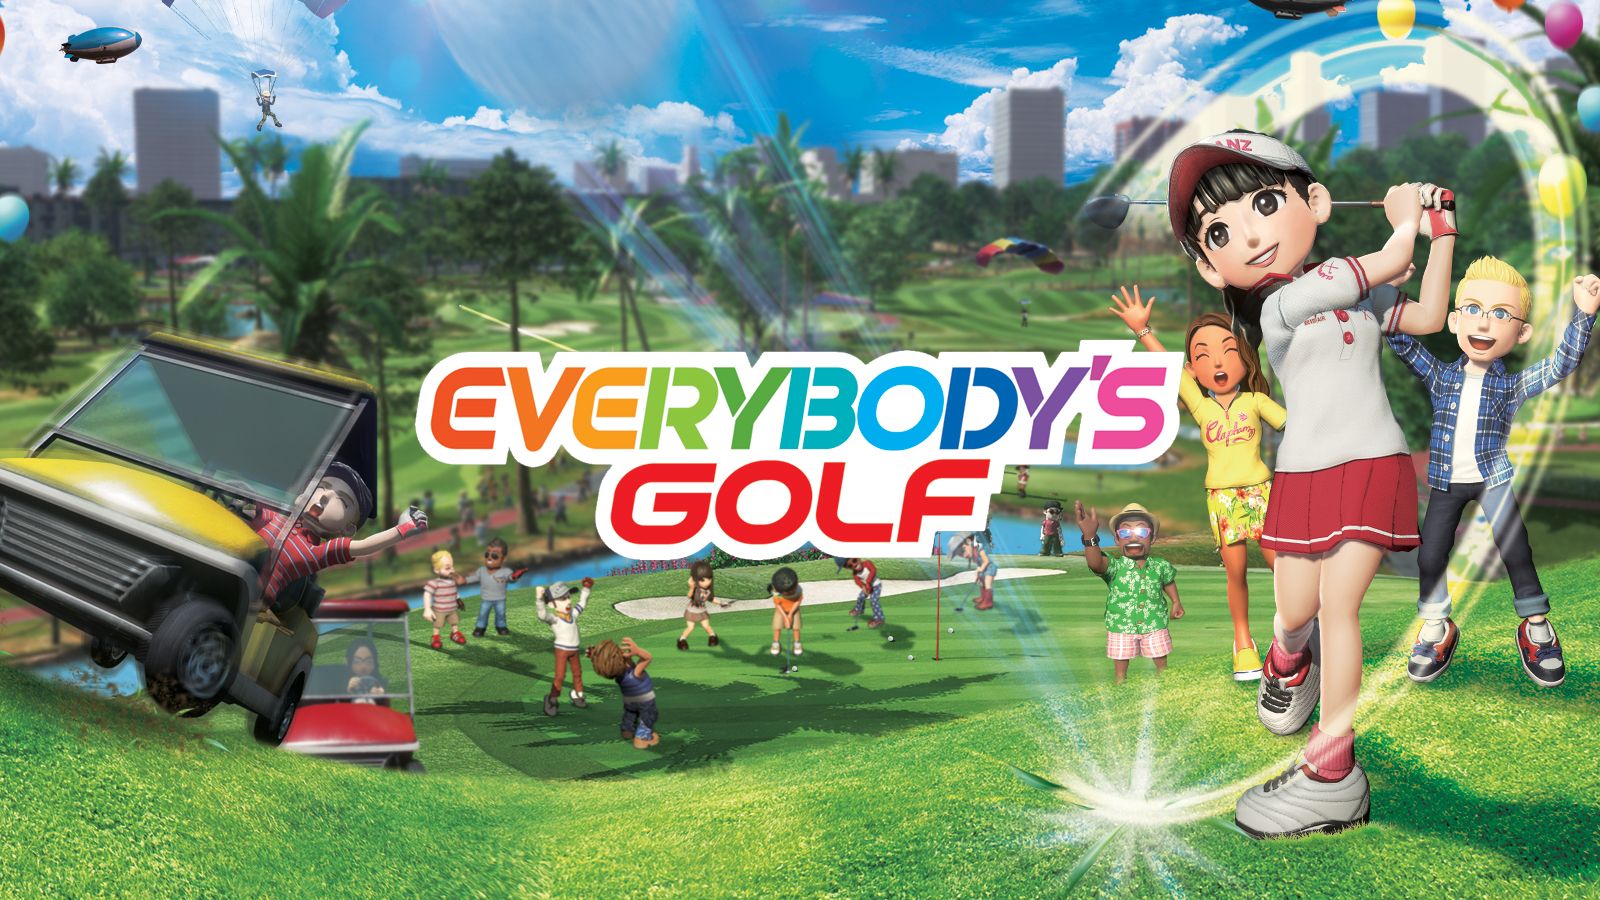 A review of the game Everybody's Golf